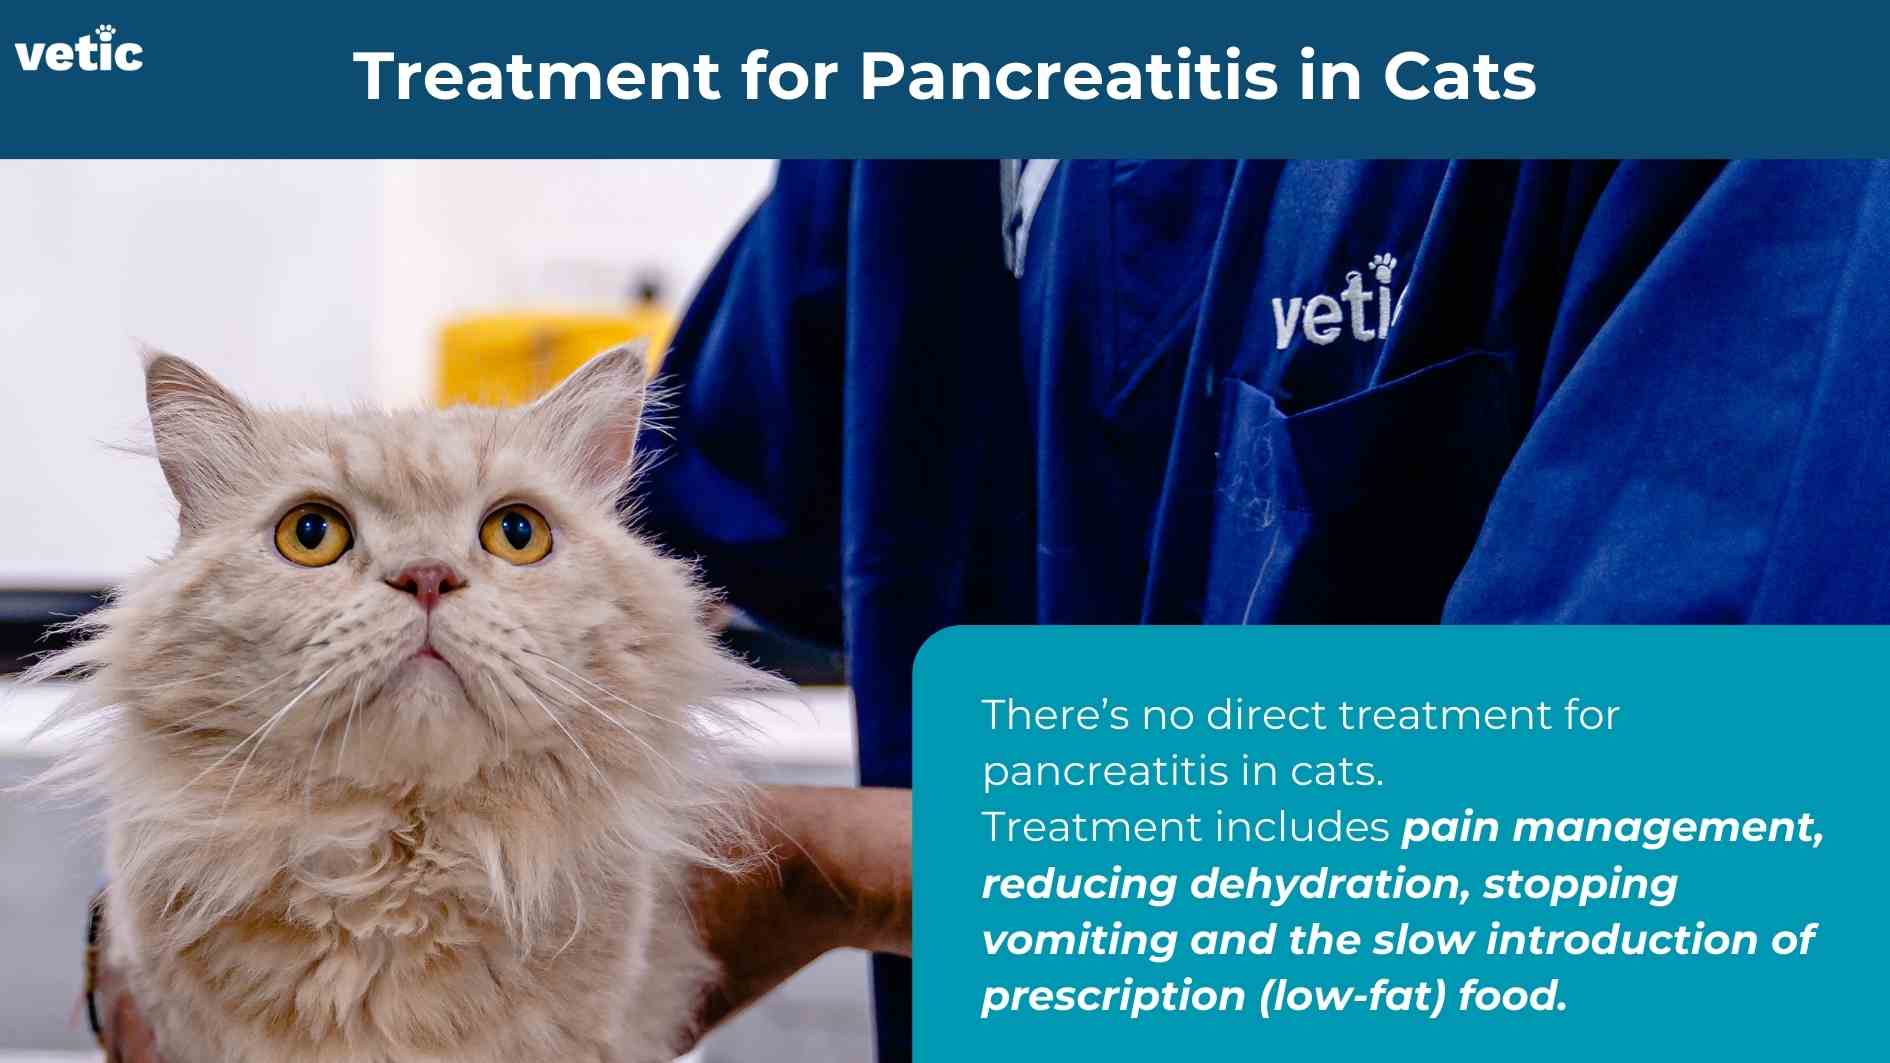 Treatment for pancreatitis in cats - a proprietary Vetic image with the veterinary nurse holding a persian cat with yellow eyes. the cat is a dull orange, has a dull coat and has weight loss. the cat is looking up at the veterinary nurse. No direct treatment for pancreatitis in cats. Treatment includes pain management, reducing dehydration, stopping vomiting and slow introduction of prescription (low-fat) food.